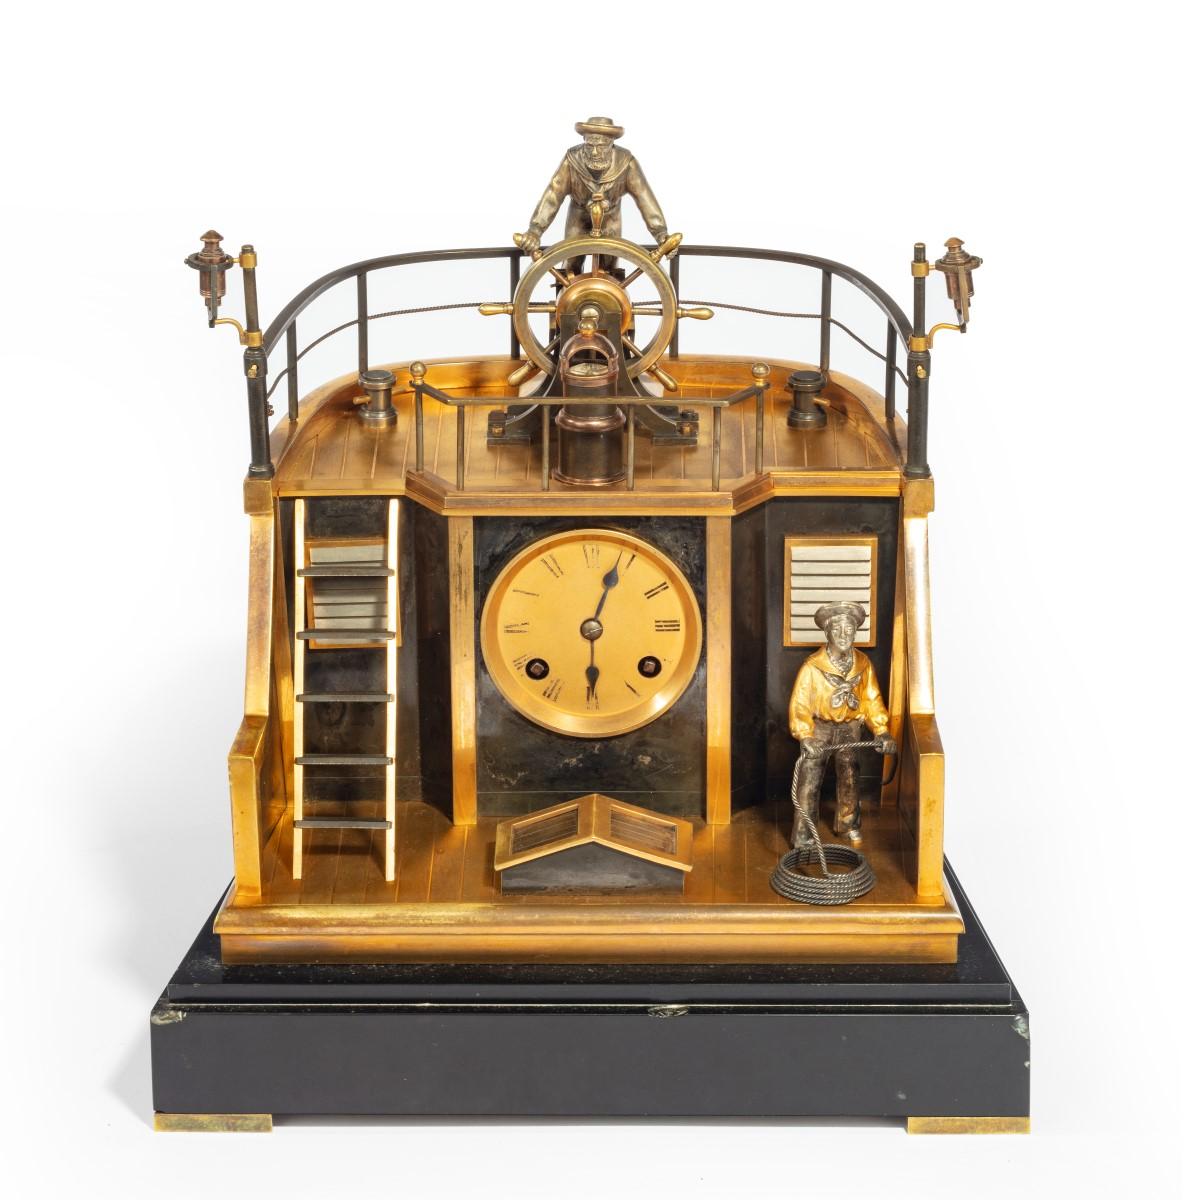 A late 19th century French gilt-brass and steel novelty ‘quarterdeck’ mantel clock by Guilmet, Paris